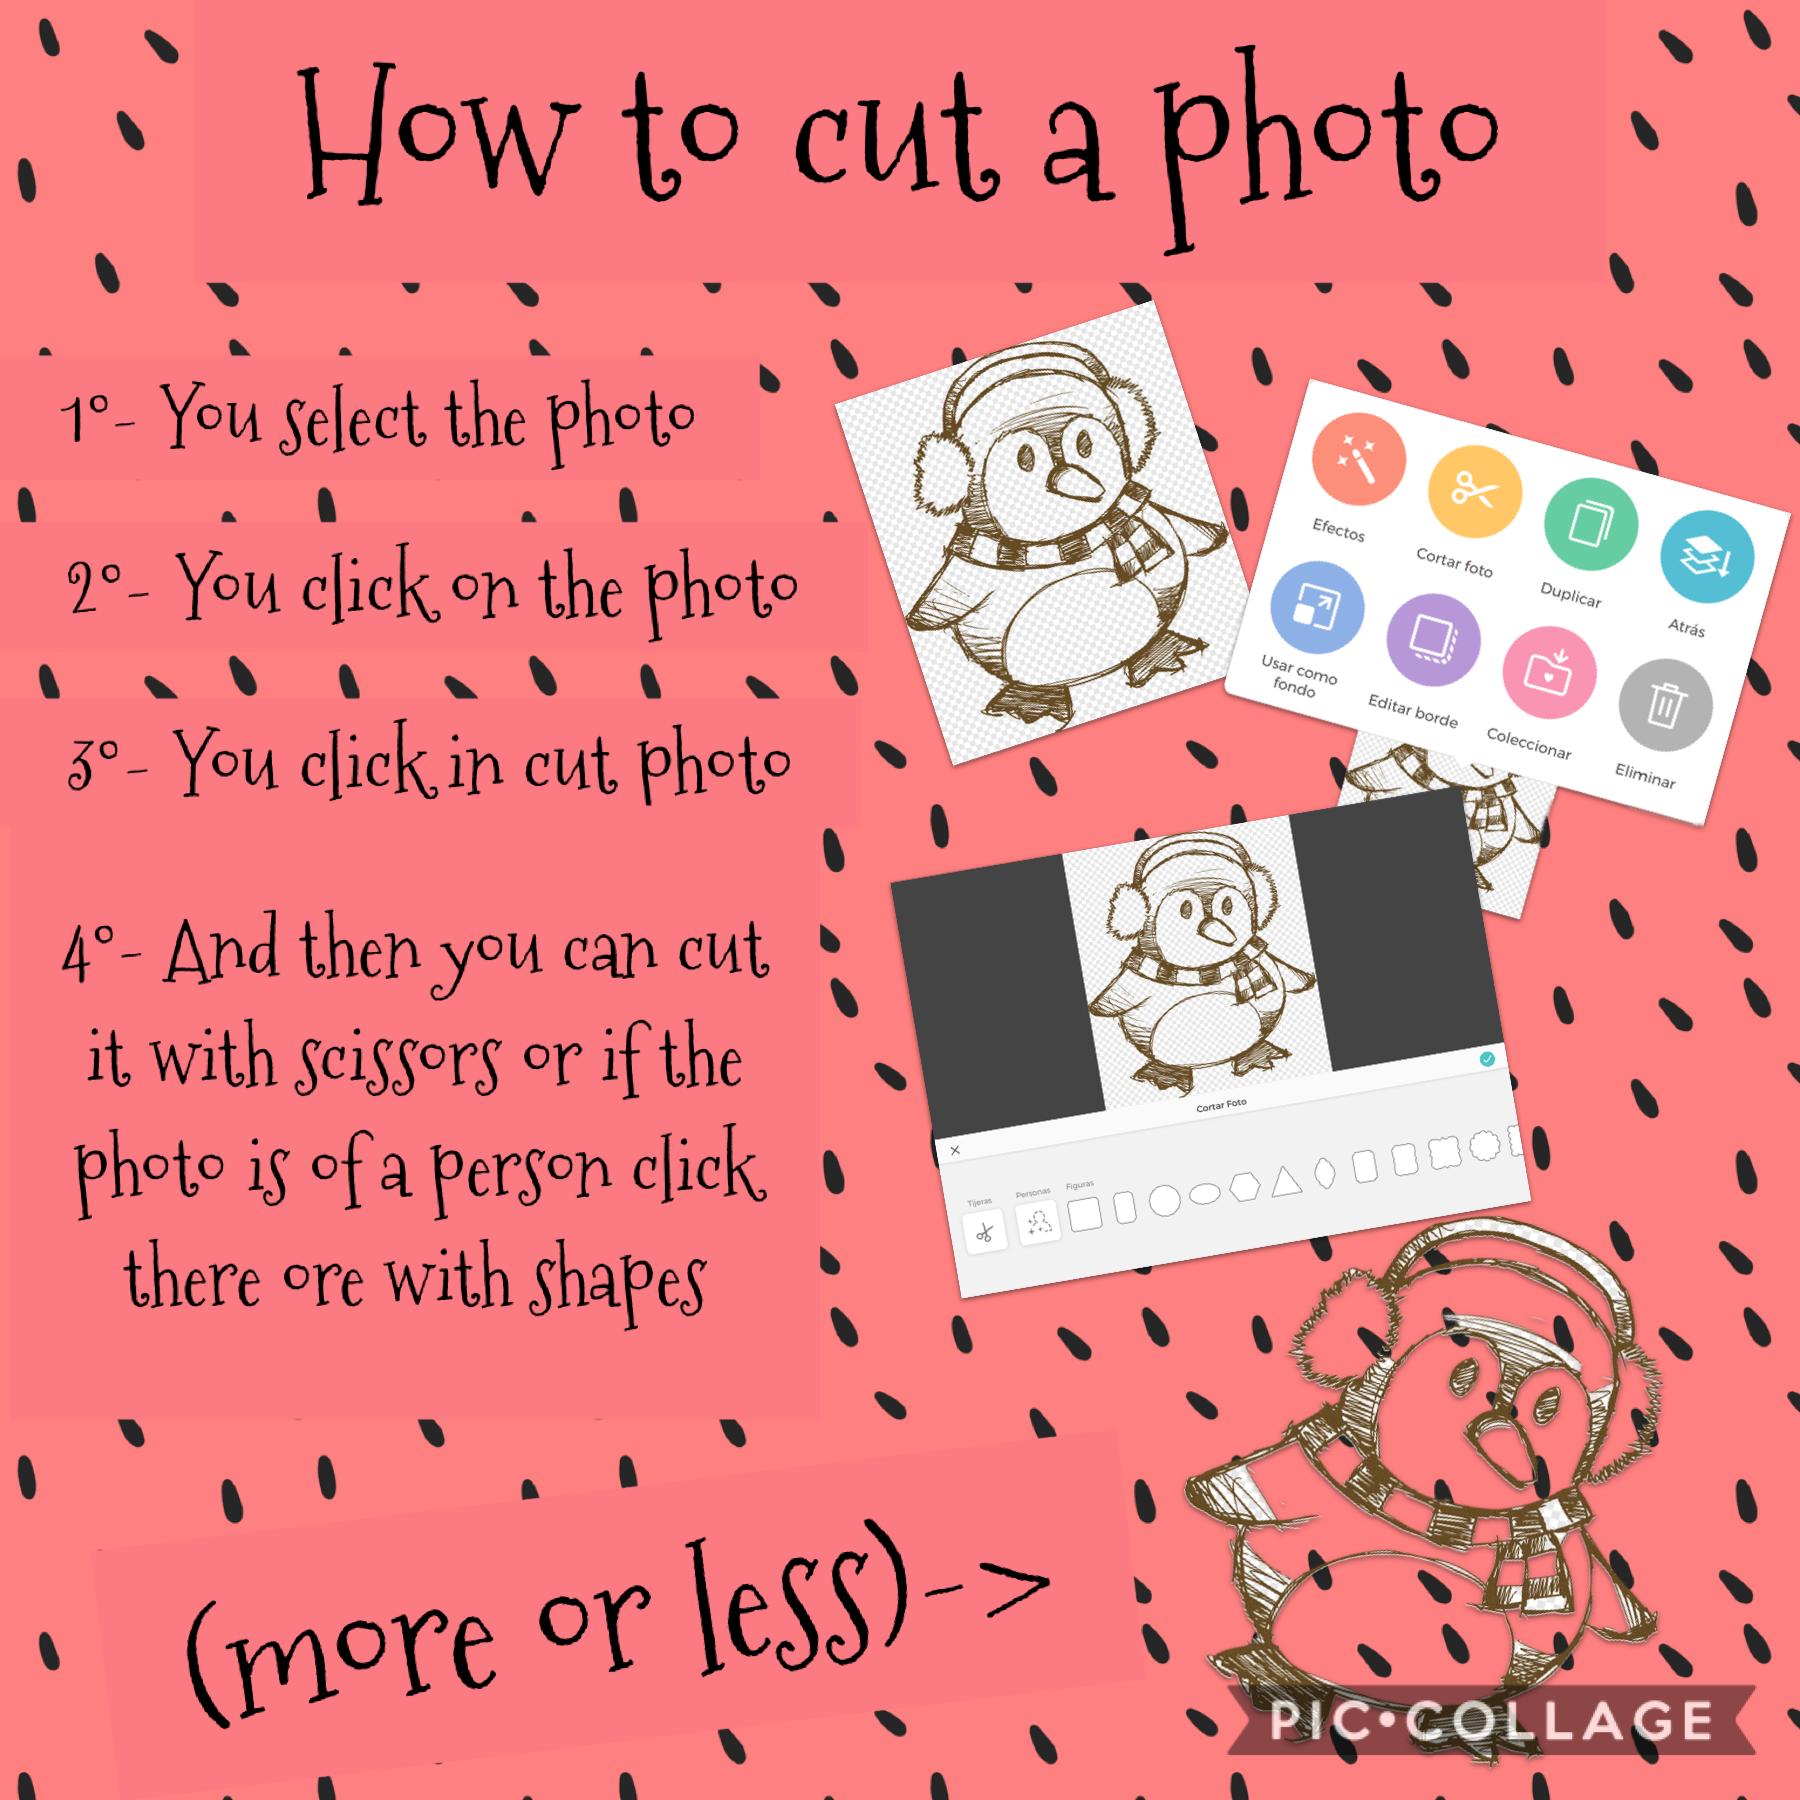 How to cut a photo